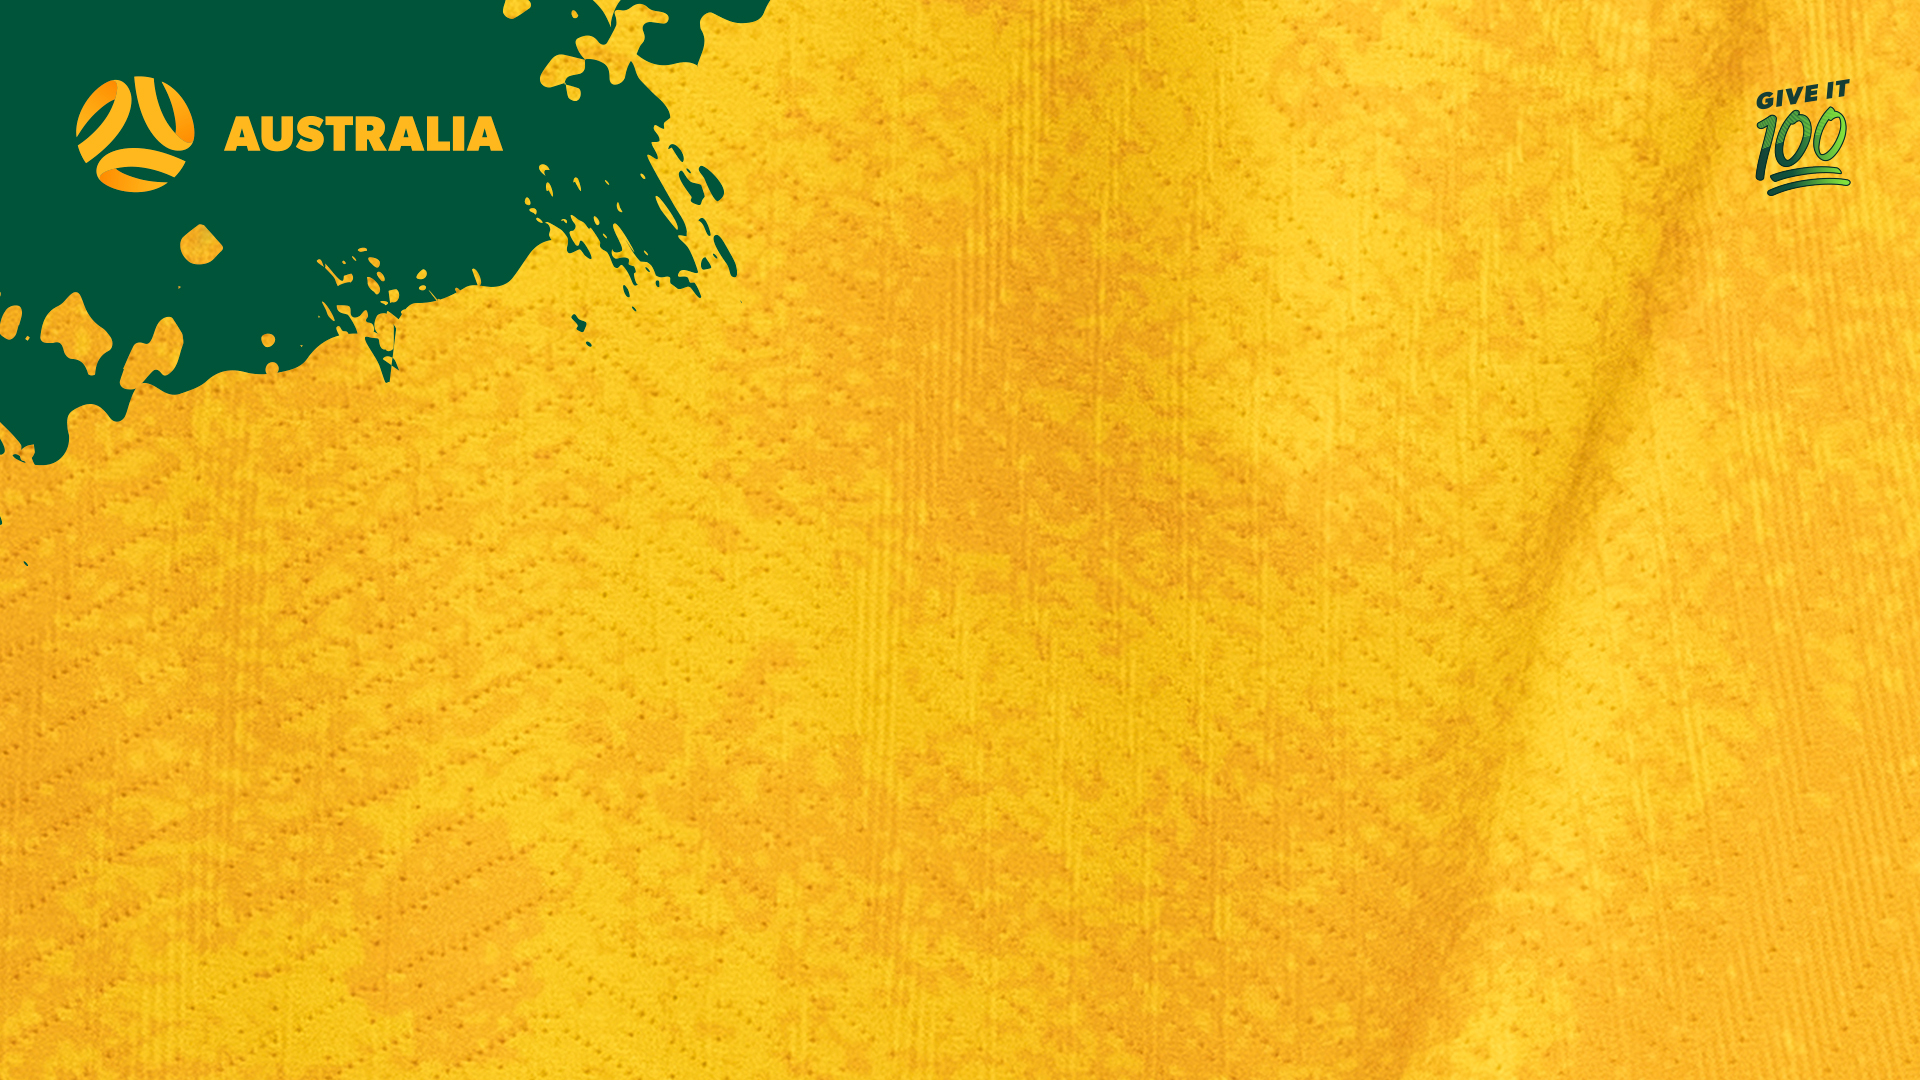 Download your Socceroos' FIFA World Cup Wallpapers here! | Socceroos